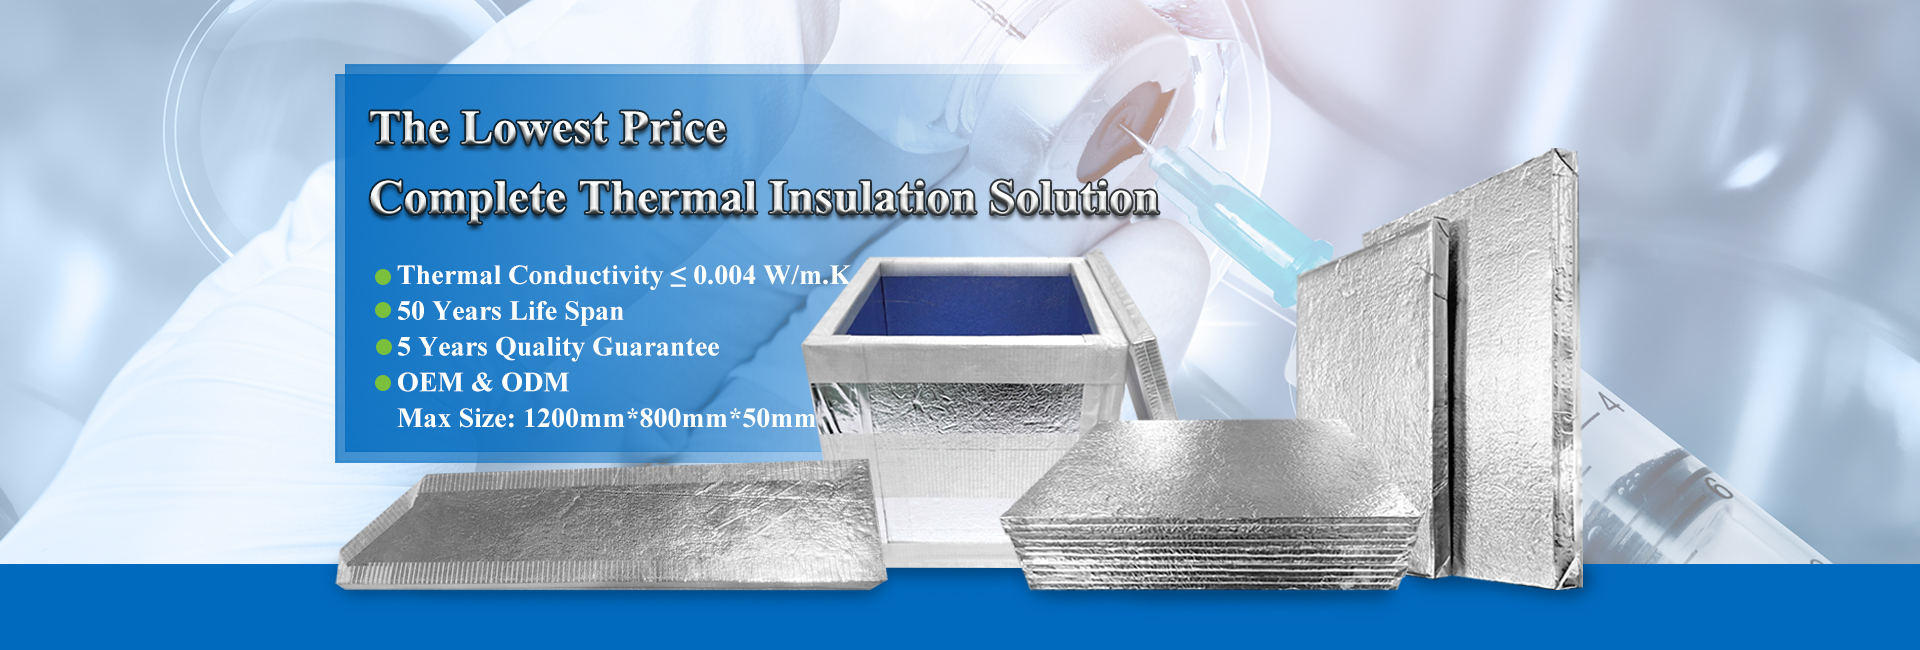 https://www.zerothermovip.com/fumed-silica-vacuum-insulation-panel-for-cold-chain-logistics-product/